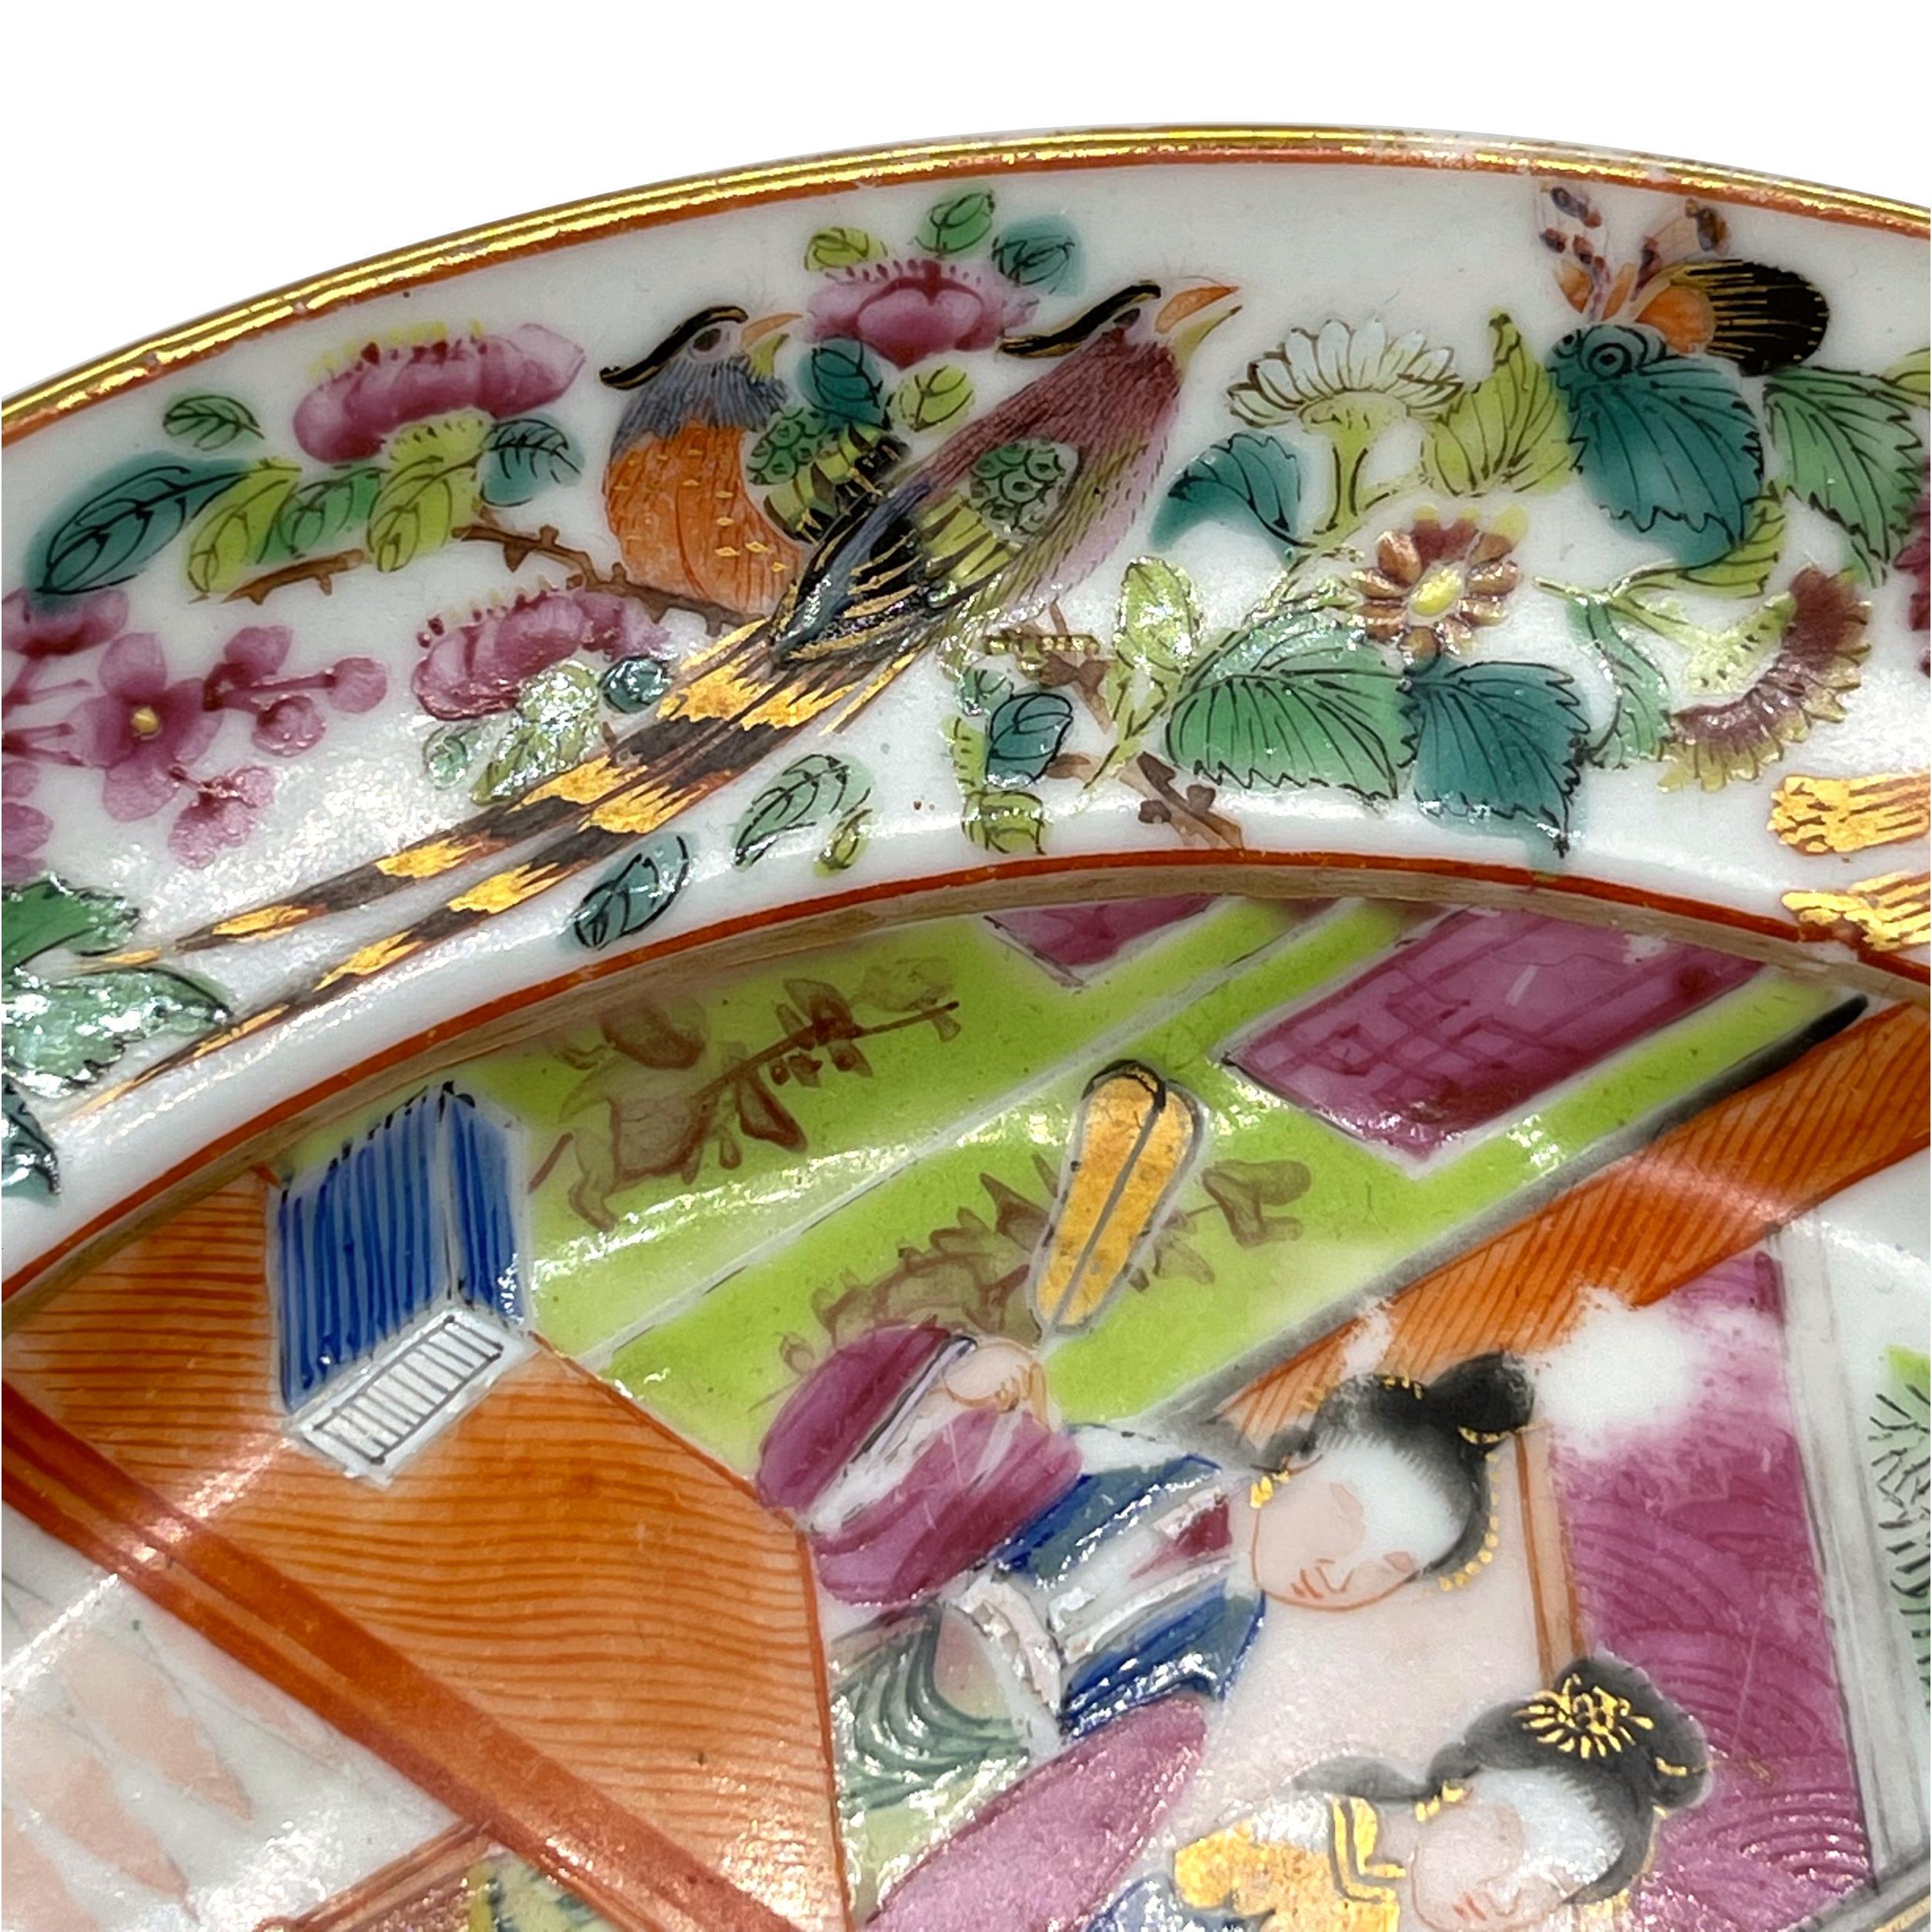 Mid-19th Century Chinese Export Porcelain Rose Mandarin Plate 8-ins, Canton, ca. 1840 